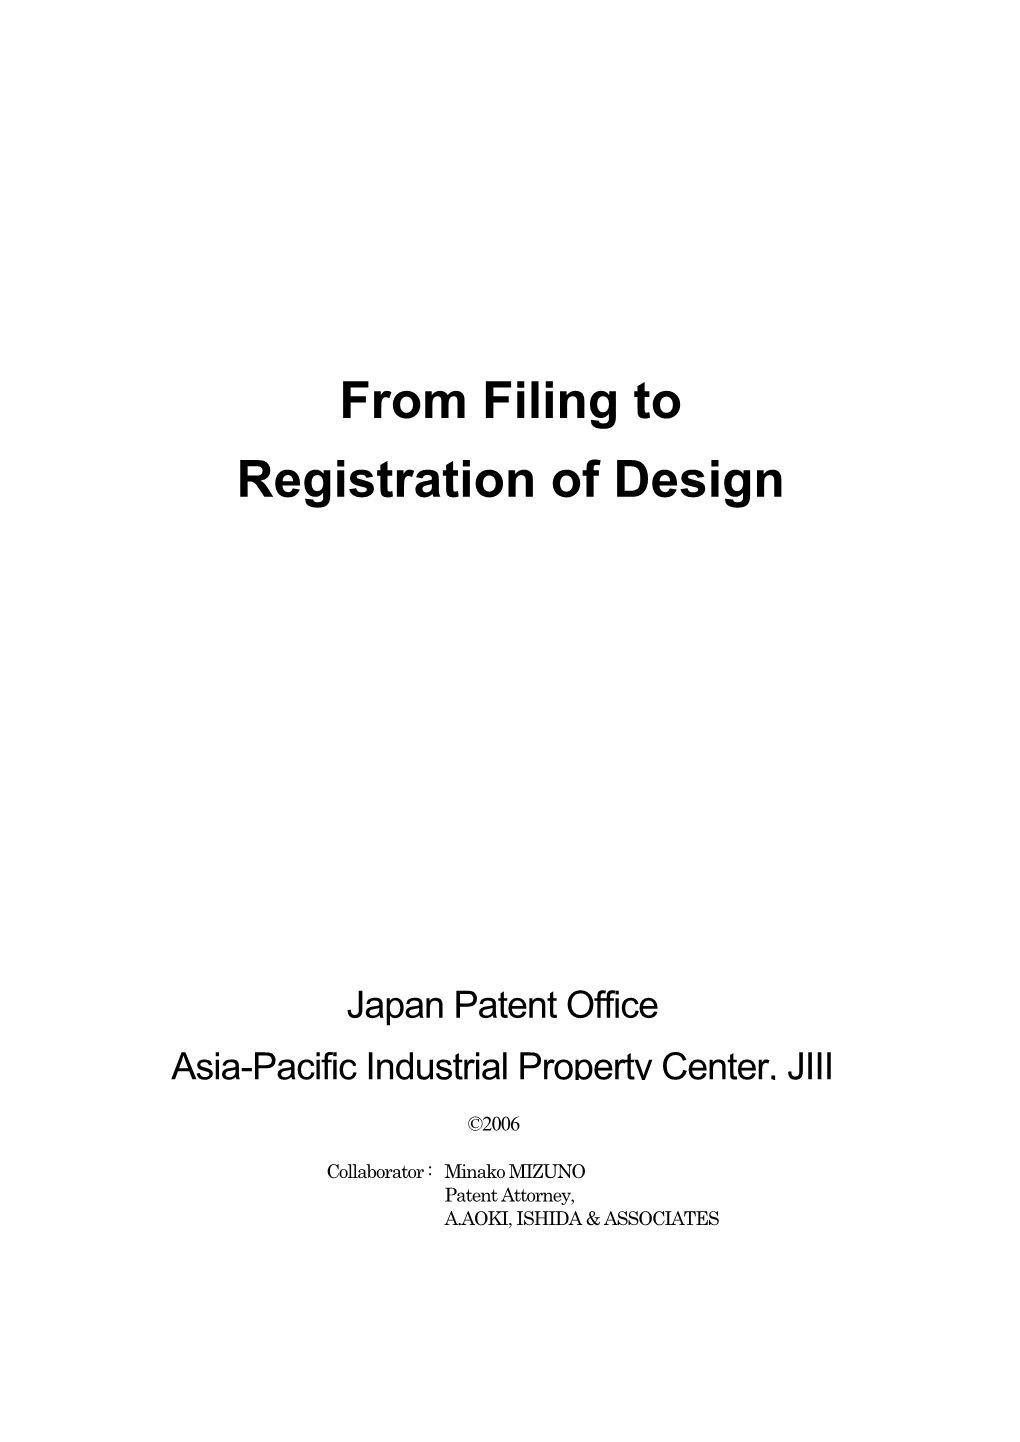 From Filing to Registration of Design(2006)